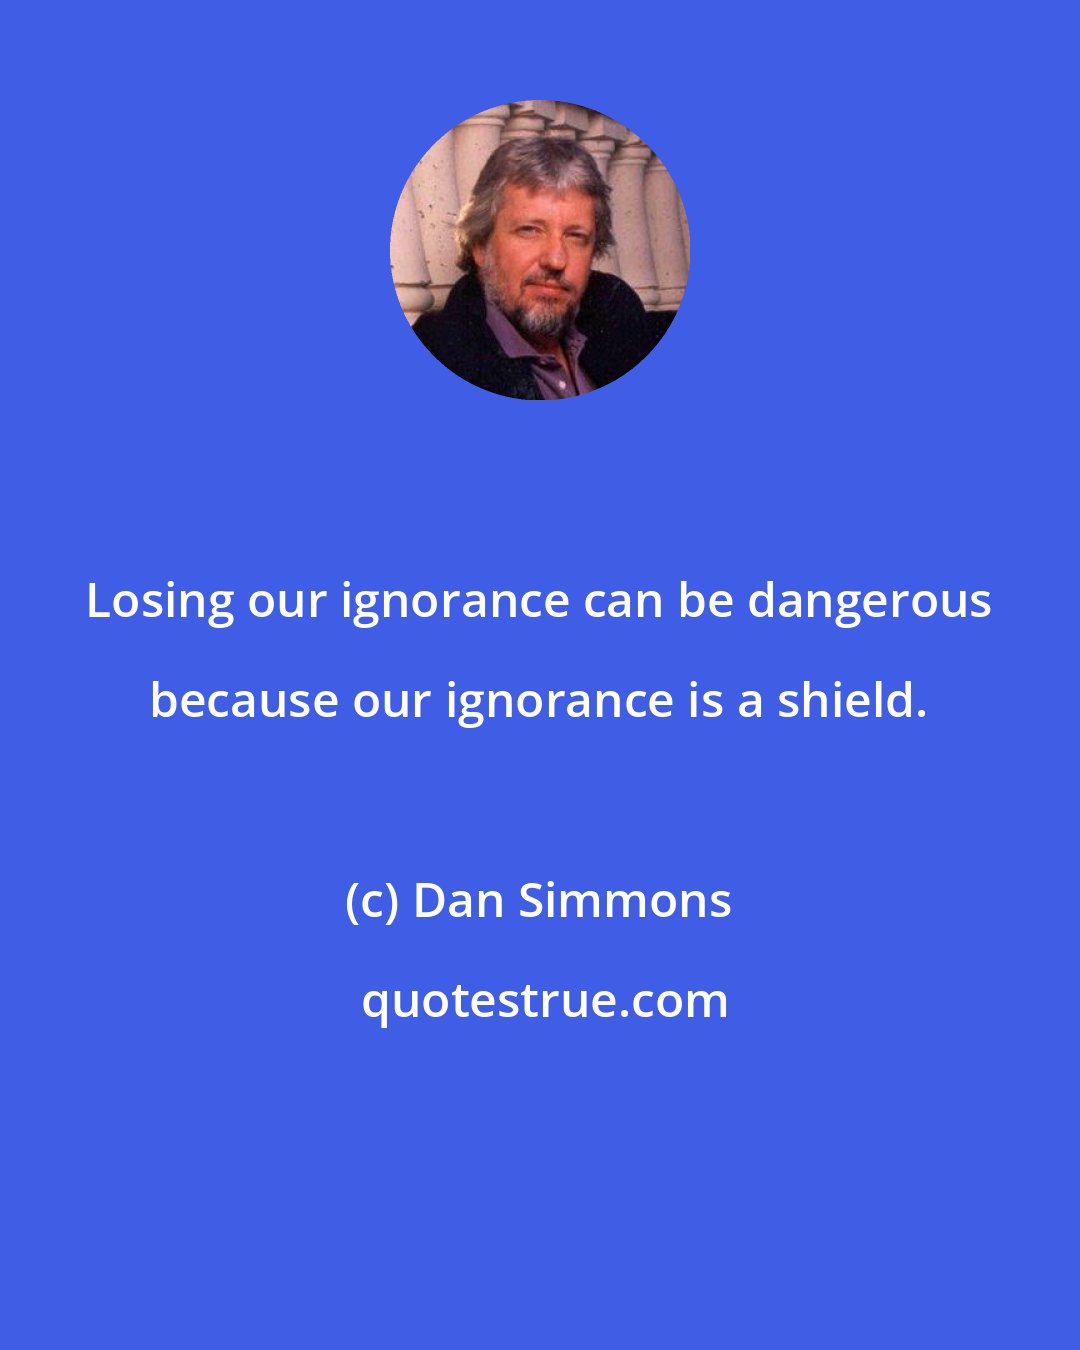 Dan Simmons: Losing our ignorance can be dangerous because our ignorance is a shield.